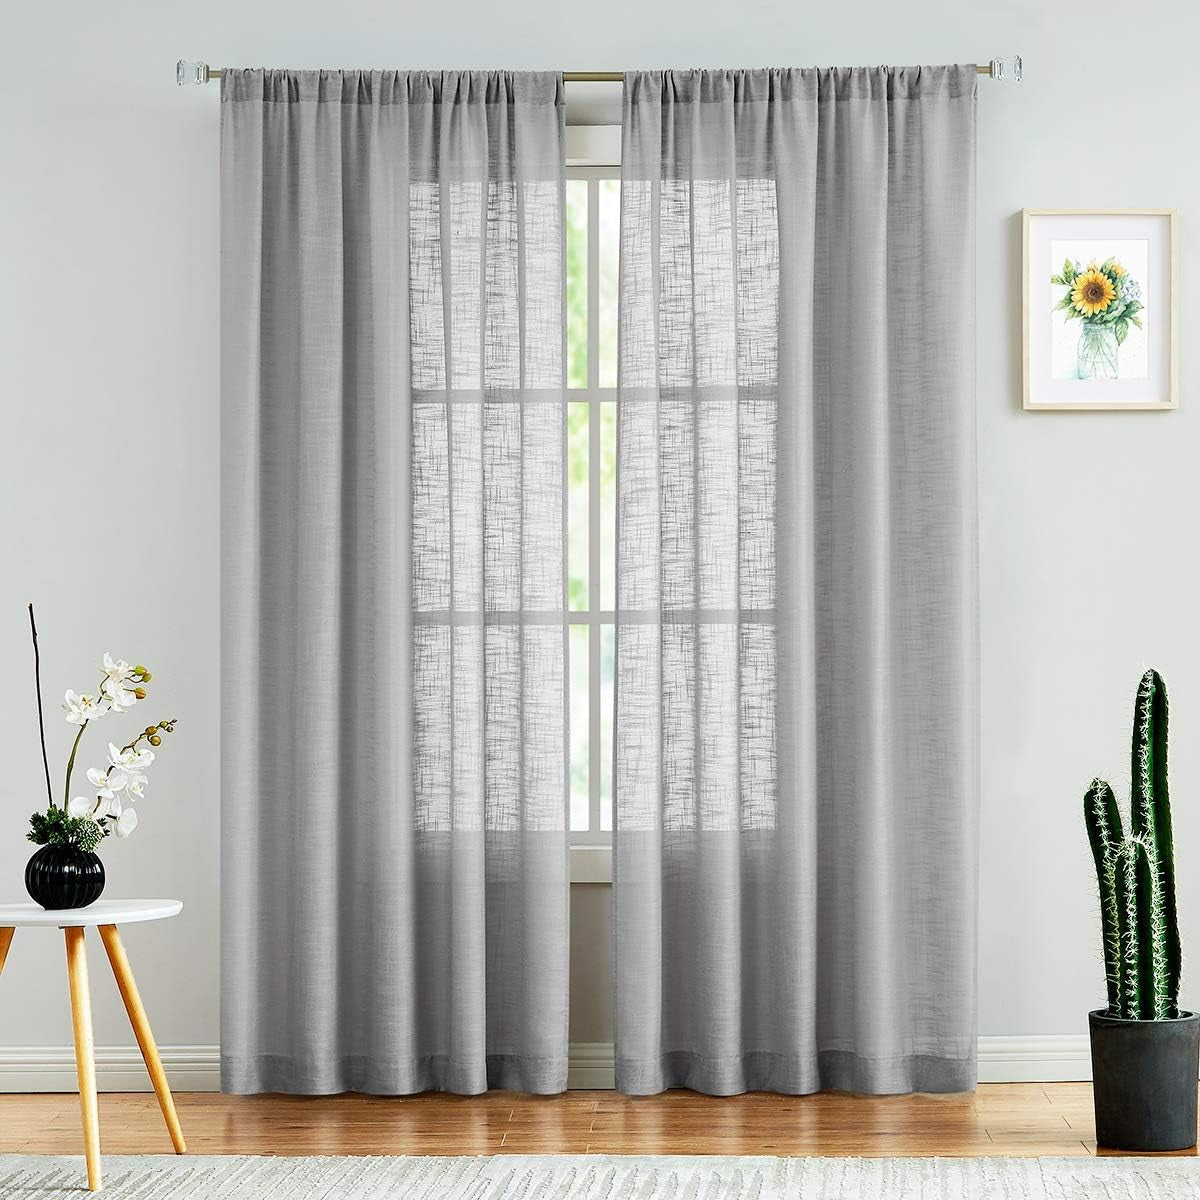 FMFUNCTEX Grey Semi-Sheer Curtains for Living Room Rich Linen Textured Rod Pocket Window Curtain Draperies for Guest Room Not See through 52”W X63”L Set of 2  Fmfunctex   